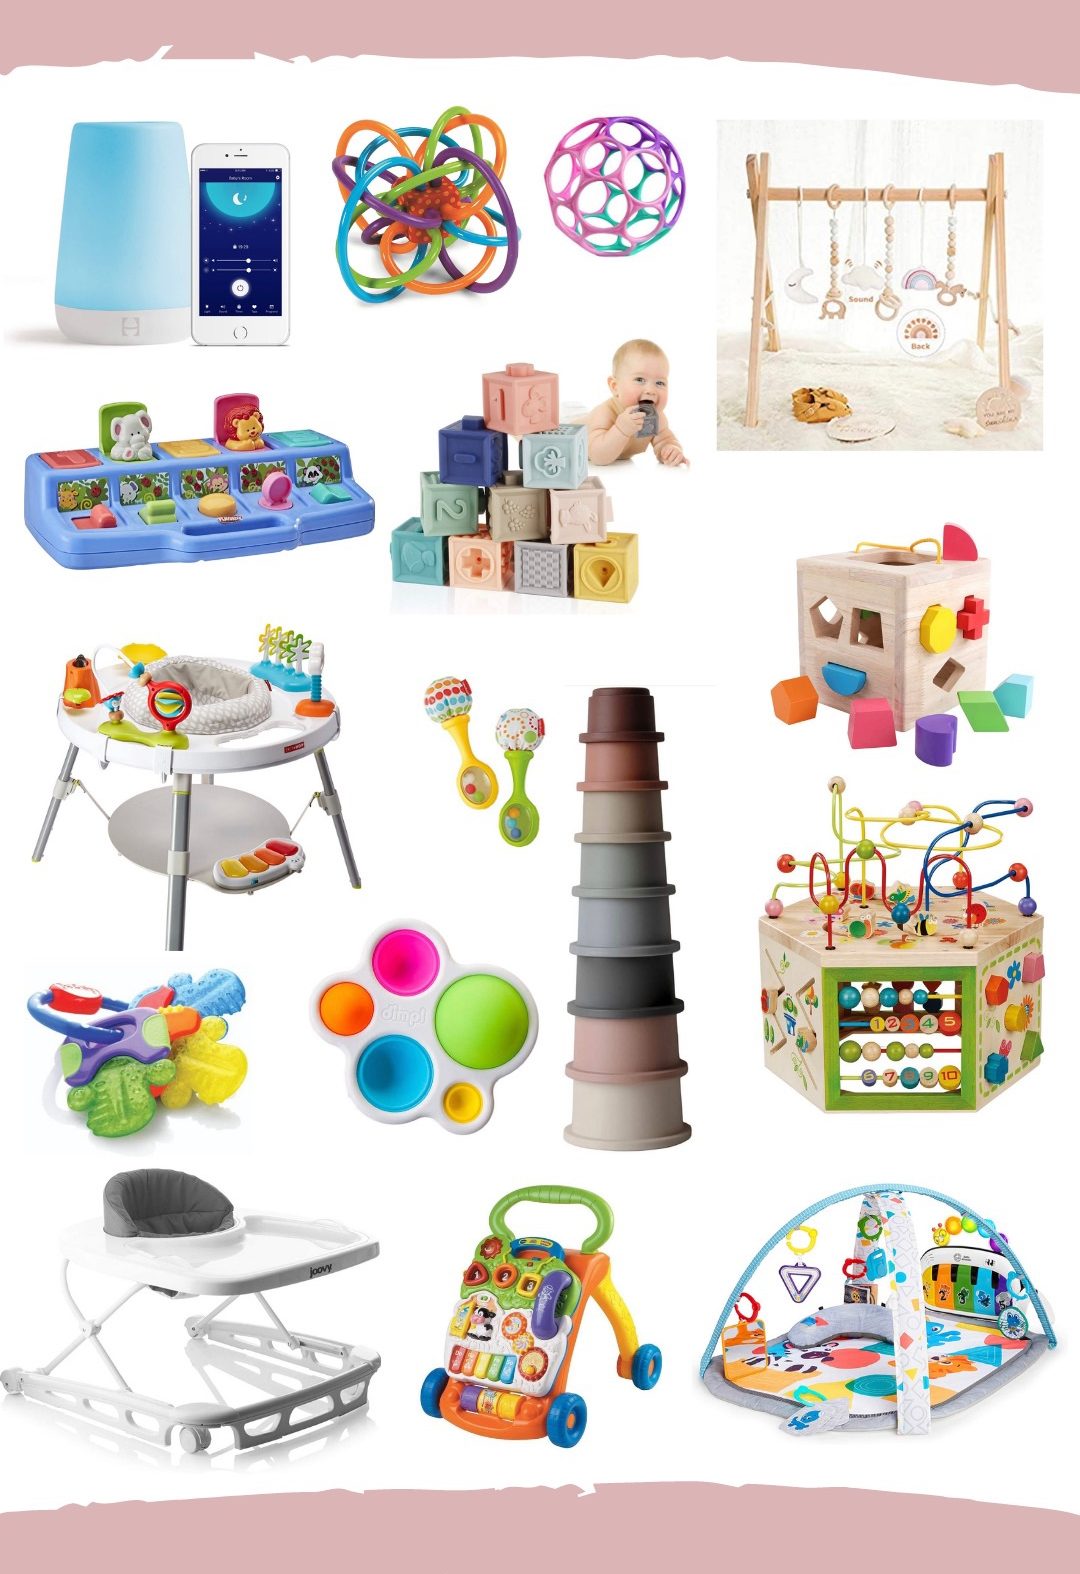 2020 Gift Guide for Babies